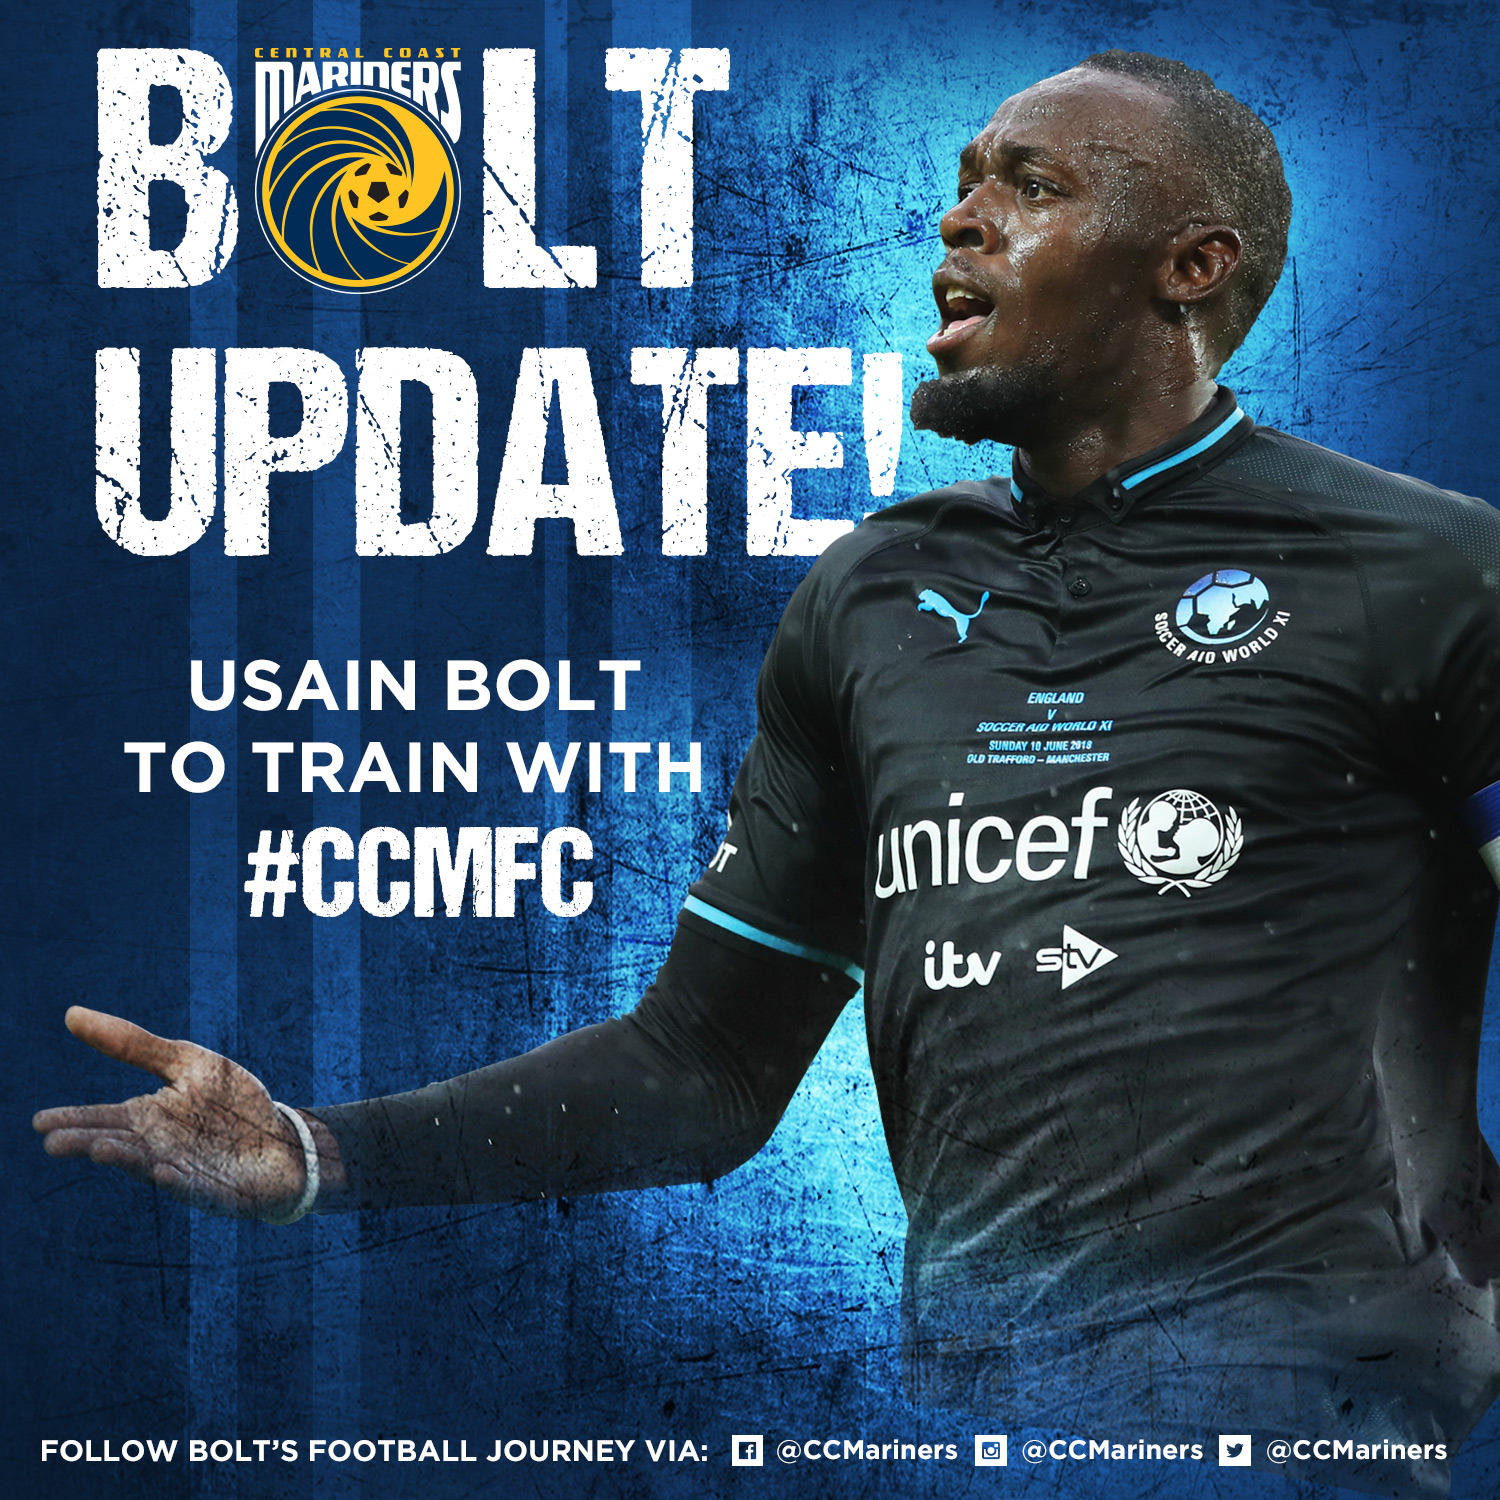 Usain joins the Central Coast Mariners